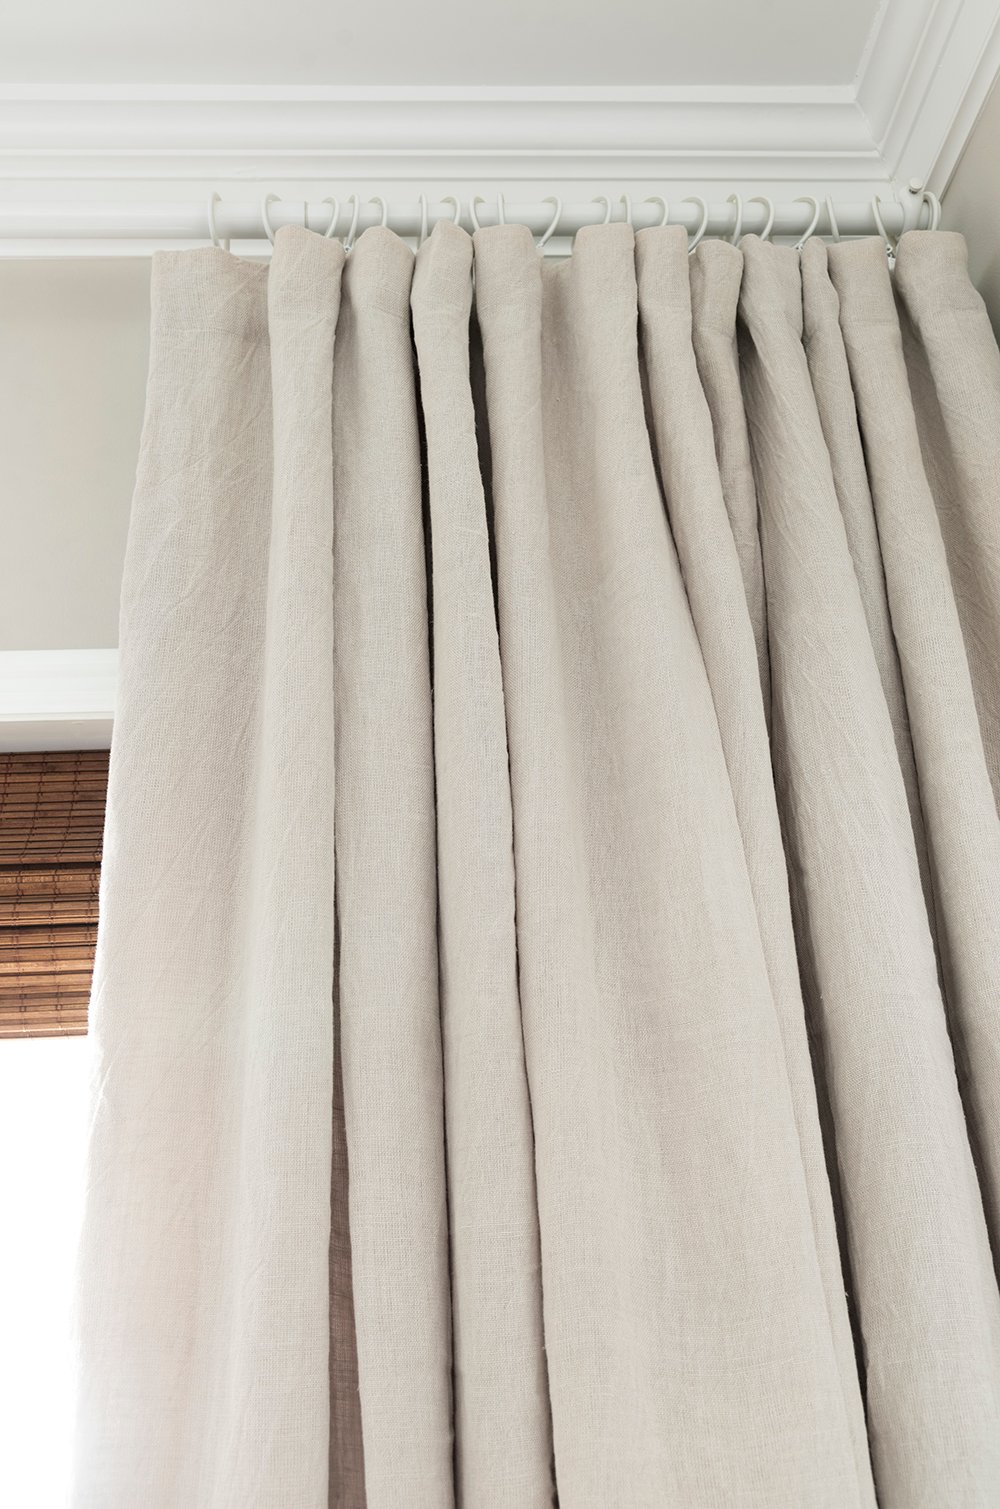 How to Install Casual Linen Drapery Panels - roomfortuesday.com